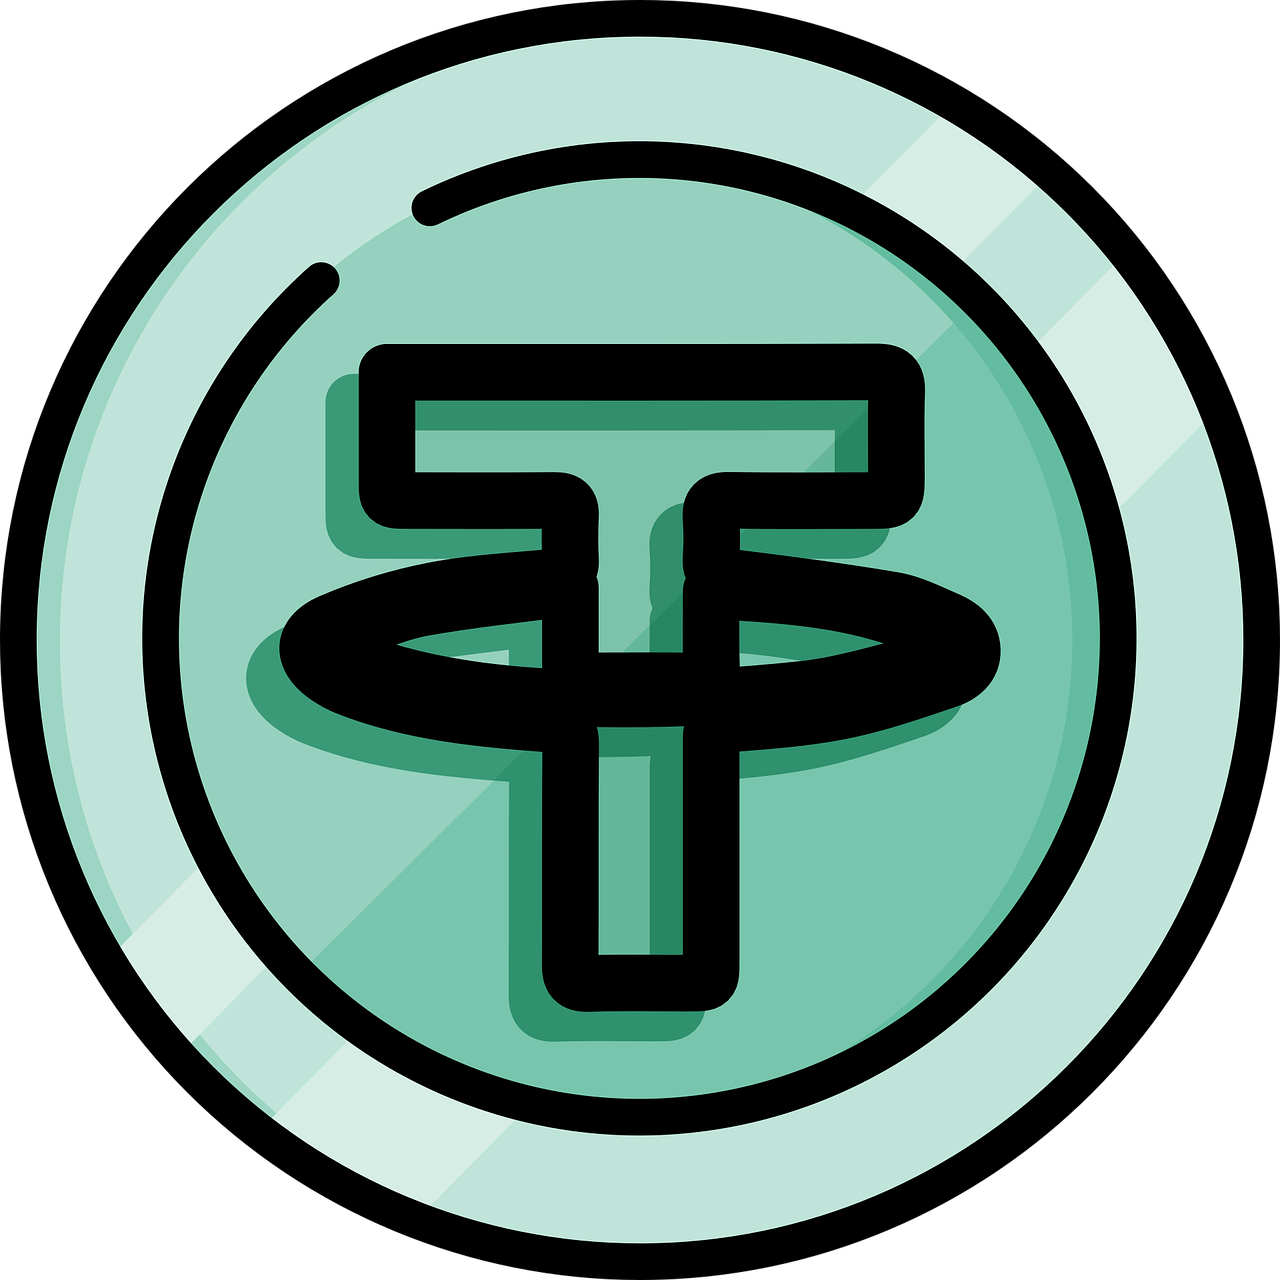 Free tether crypto currency coin vector